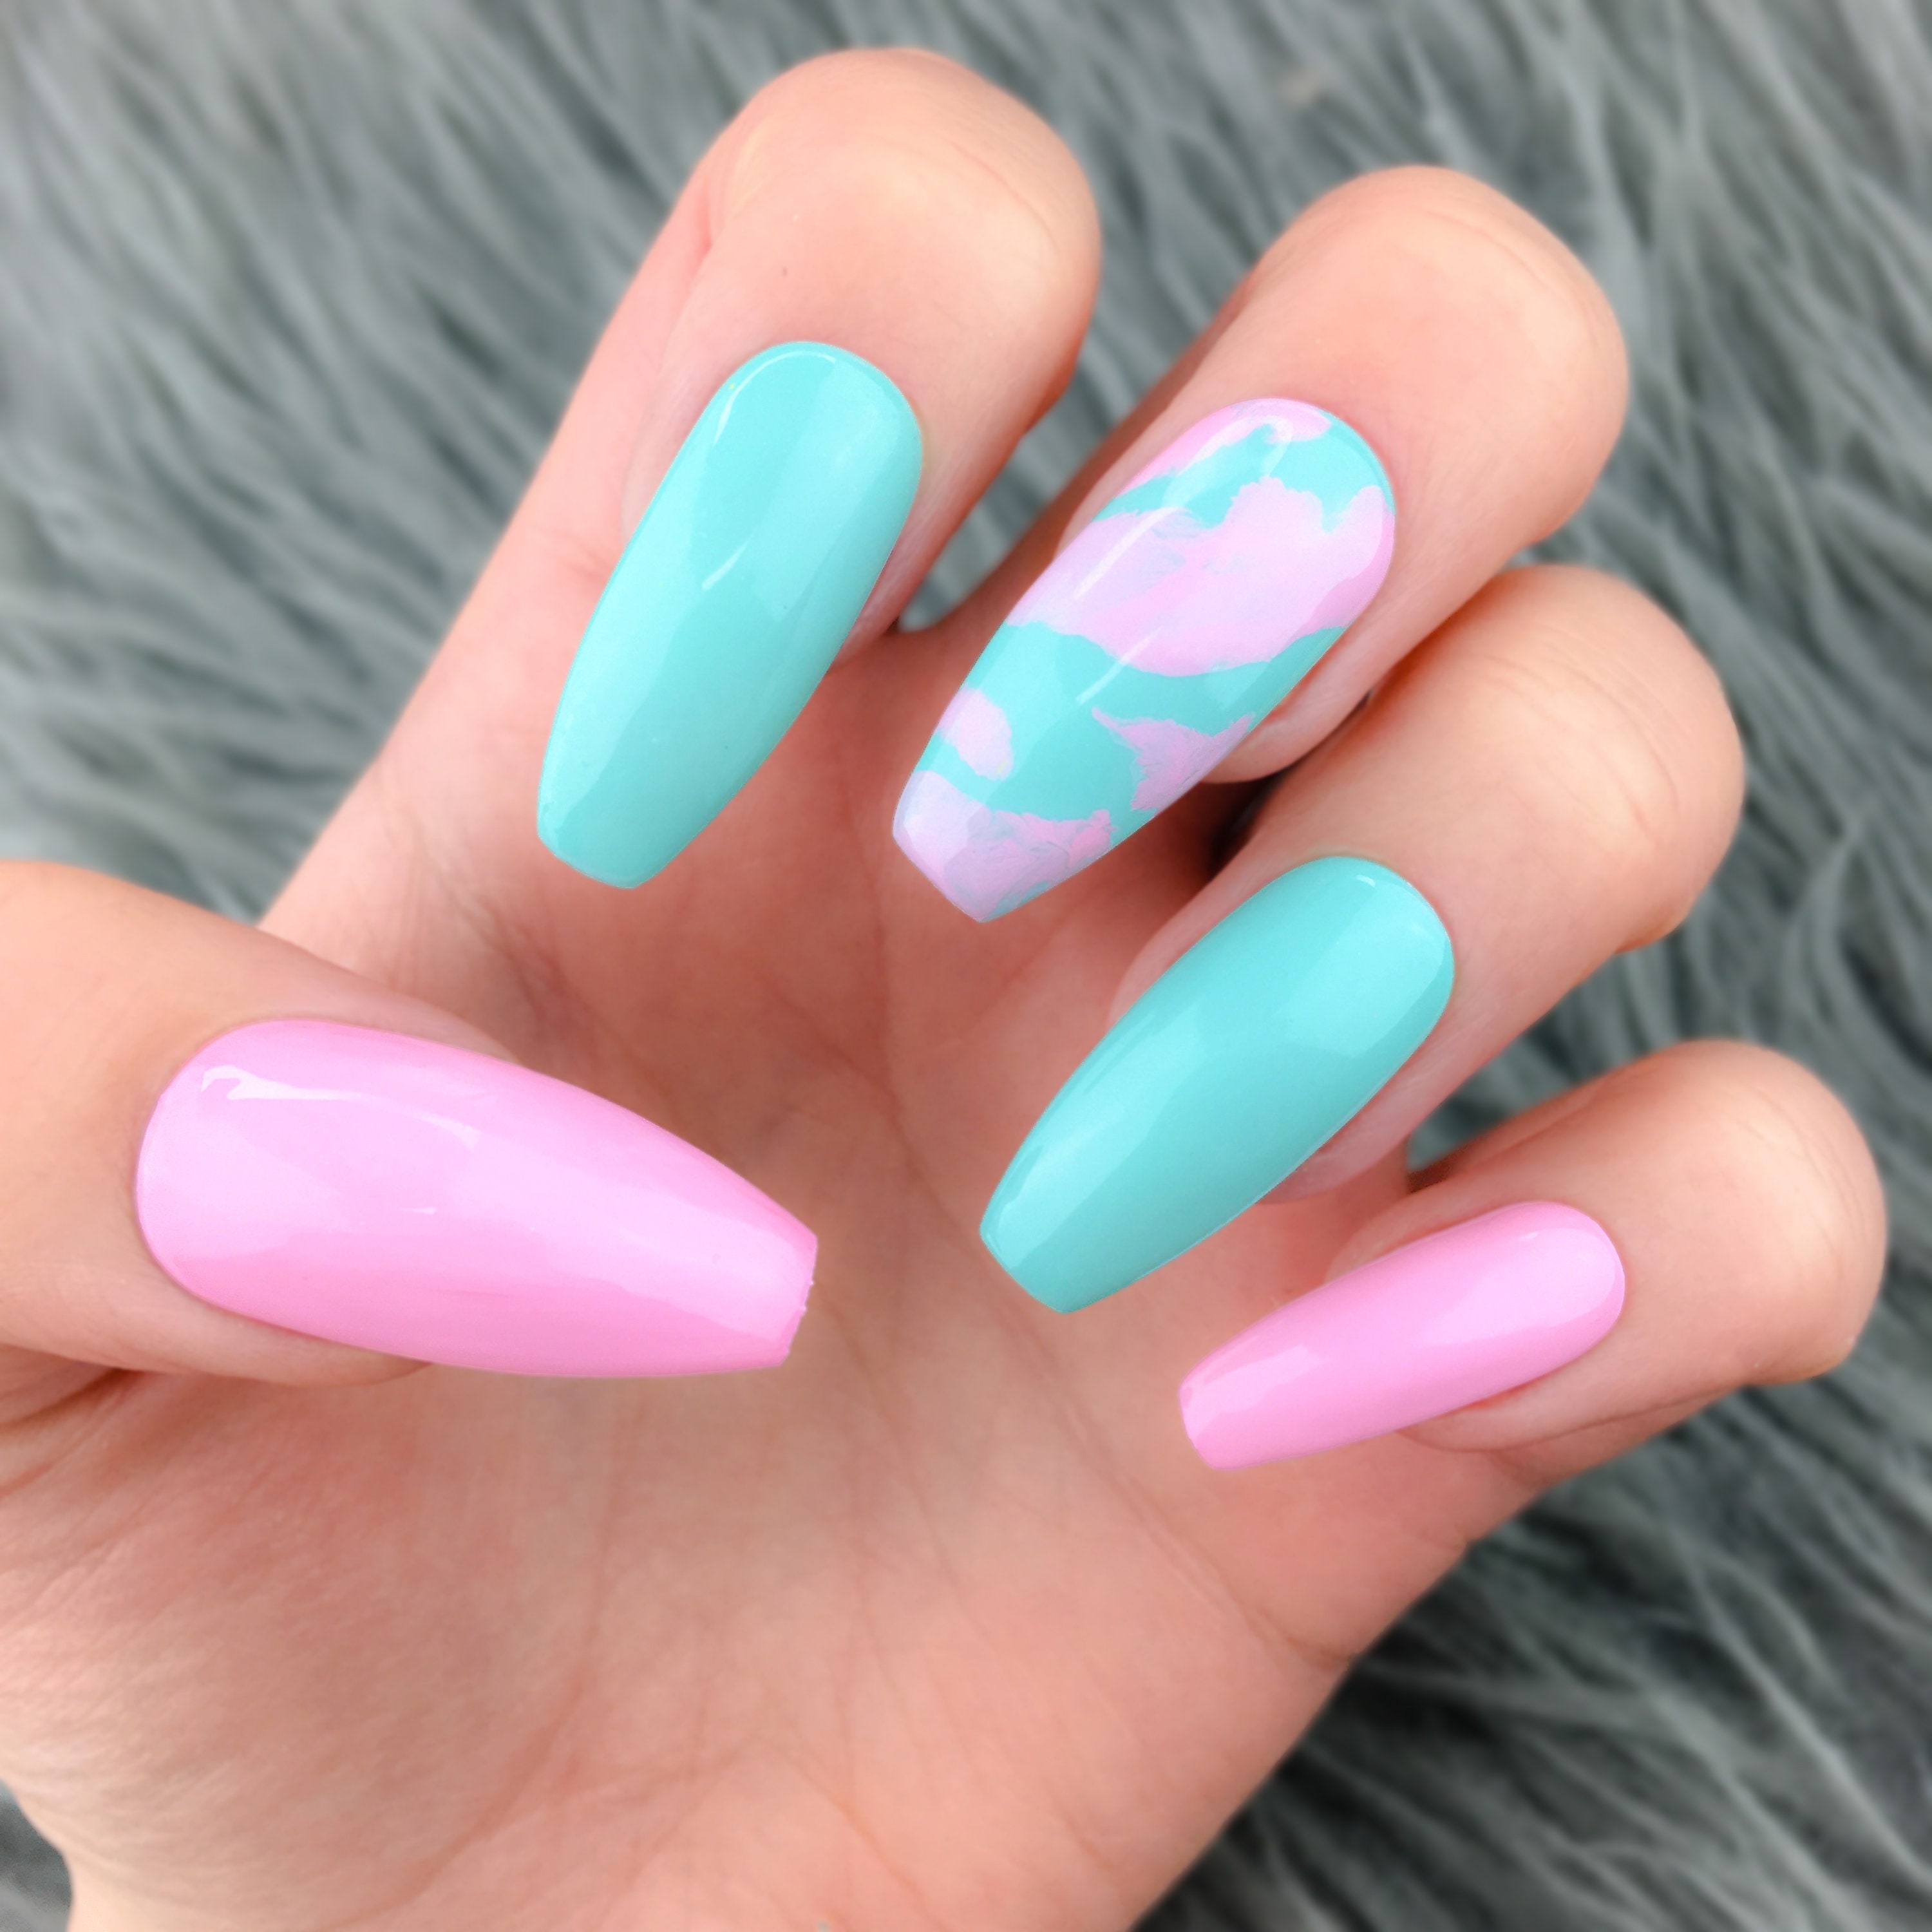 Cotton Candy Press on Nails REUSABLE Blue and Pink Nails - Etsy